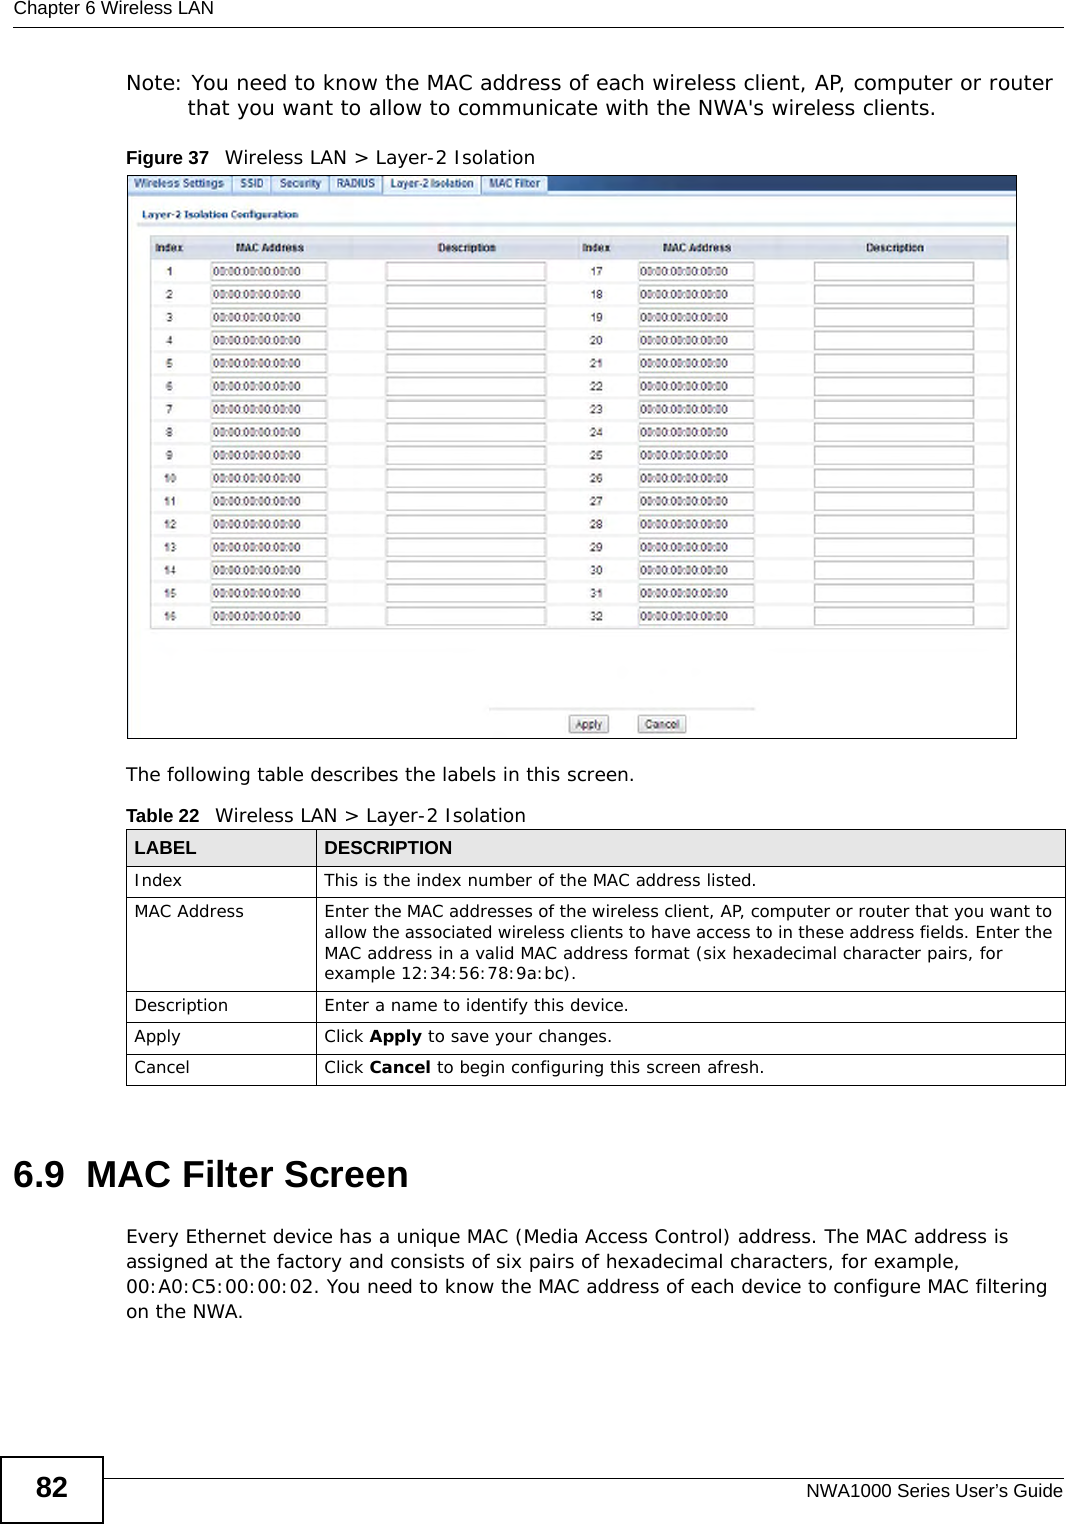 Chapter 6 Wireless LANNWA1000 Series User’s Guide82Note: You need to know the MAC address of each wireless client, AP, computer or router that you want to allow to communicate with the NWA&apos;s wireless clients.Figure 37   Wireless LAN &gt; Layer-2 Isolation The following table describes the labels in this screen.6.9  MAC Filter ScreenEvery Ethernet device has a unique MAC (Media Access Control) address. The MAC address is assigned at the factory and consists of six pairs of hexadecimal characters, for example, 00:A0:C5:00:00:02. You need to know the MAC address of each device to configure MAC filtering on the NWA.Table 22   Wireless LAN &gt; Layer-2 IsolationLABEL DESCRIPTIONIndex This is the index number of the MAC address listed.MAC Address Enter the MAC addresses of the wireless client, AP, computer or router that you want to allow the associated wireless clients to have access to in these address fields. Enter the MAC address in a valid MAC address format (six hexadecimal character pairs, for example 12:34:56:78:9a:bc).Description Enter a name to identify this device.Apply Click Apply to save your changes.Cancel Click Cancel to begin configuring this screen afresh.